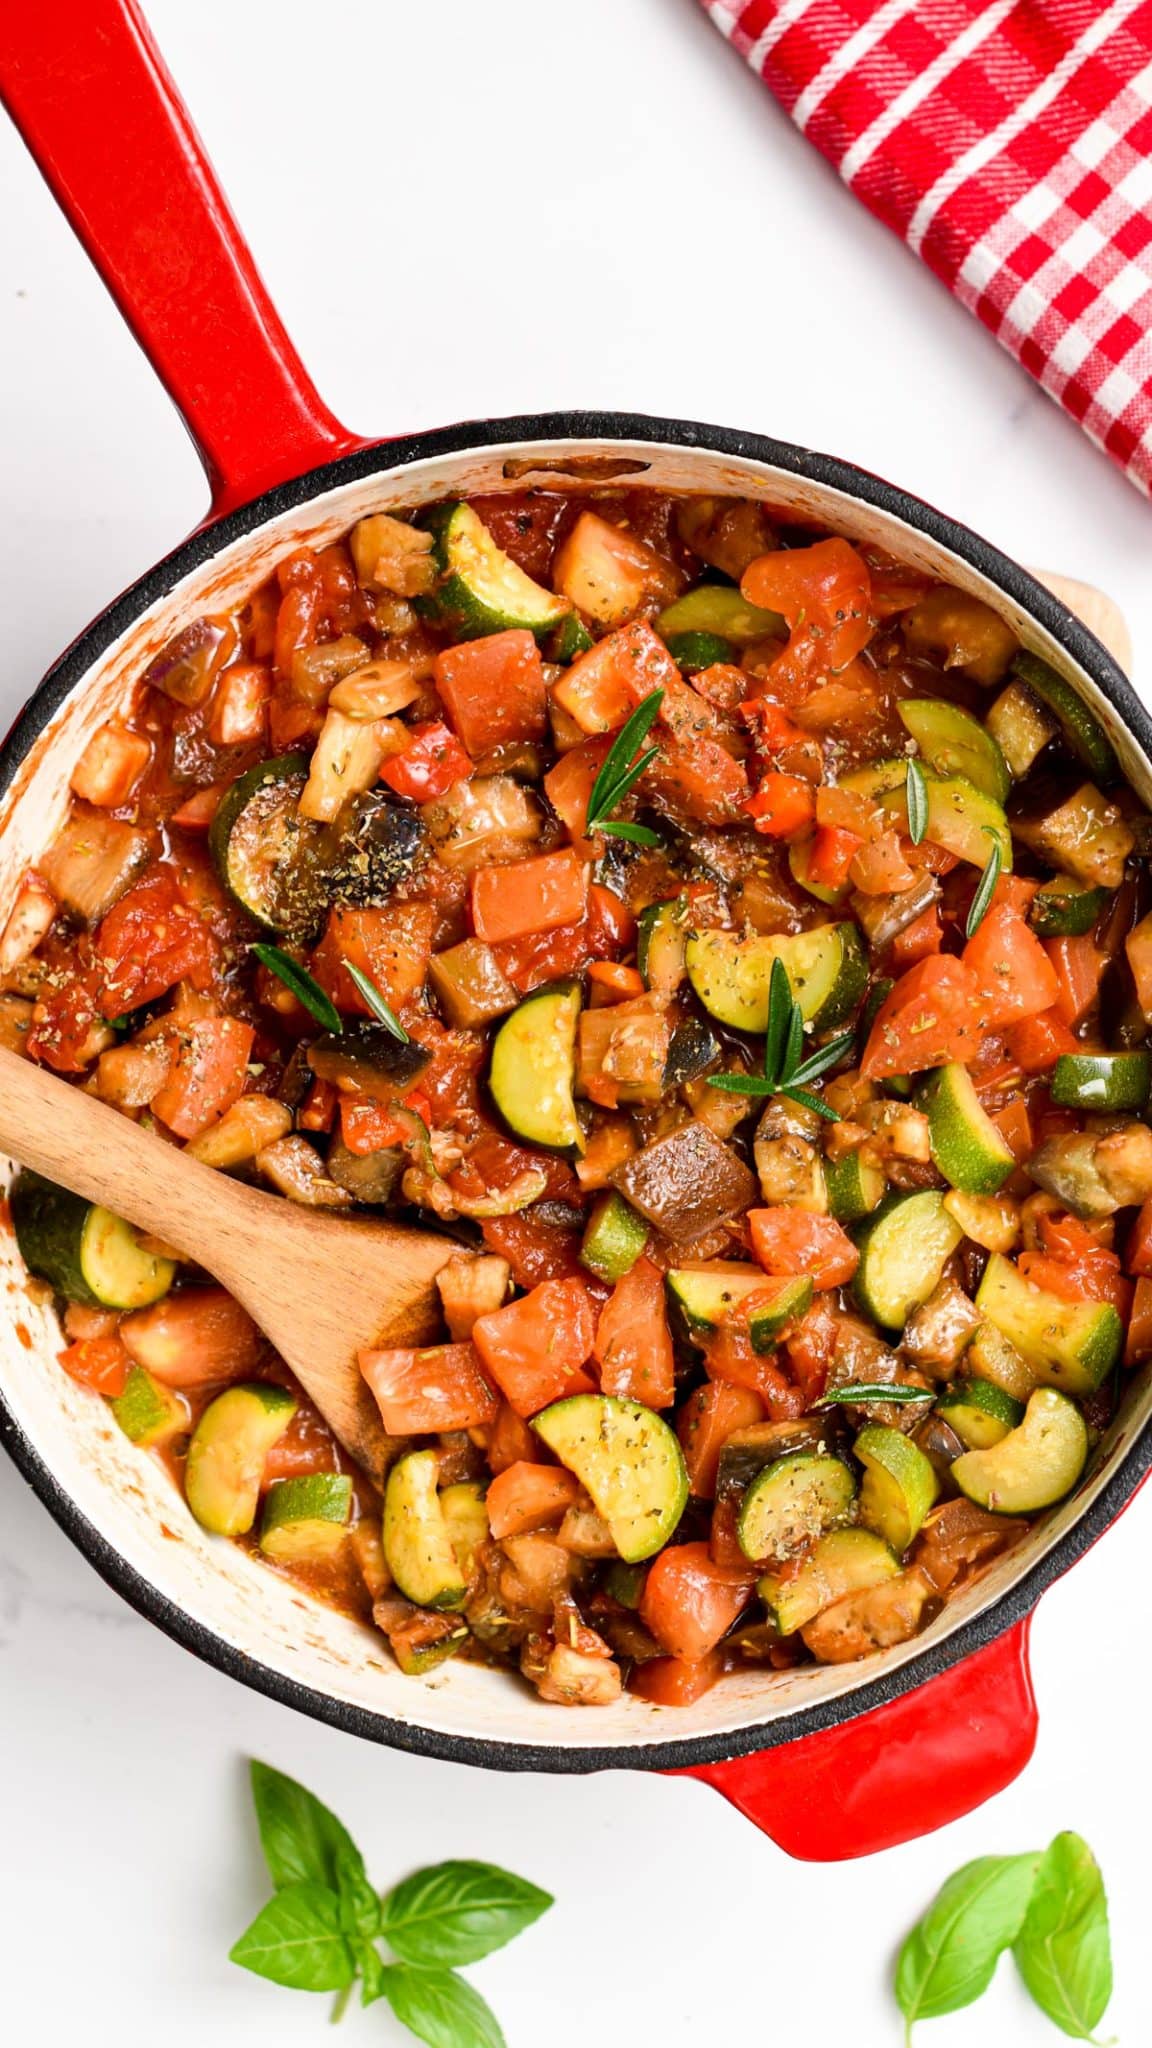 Ratatouille recipe in a large cast-iron Dutch oven with a wooden spoon.